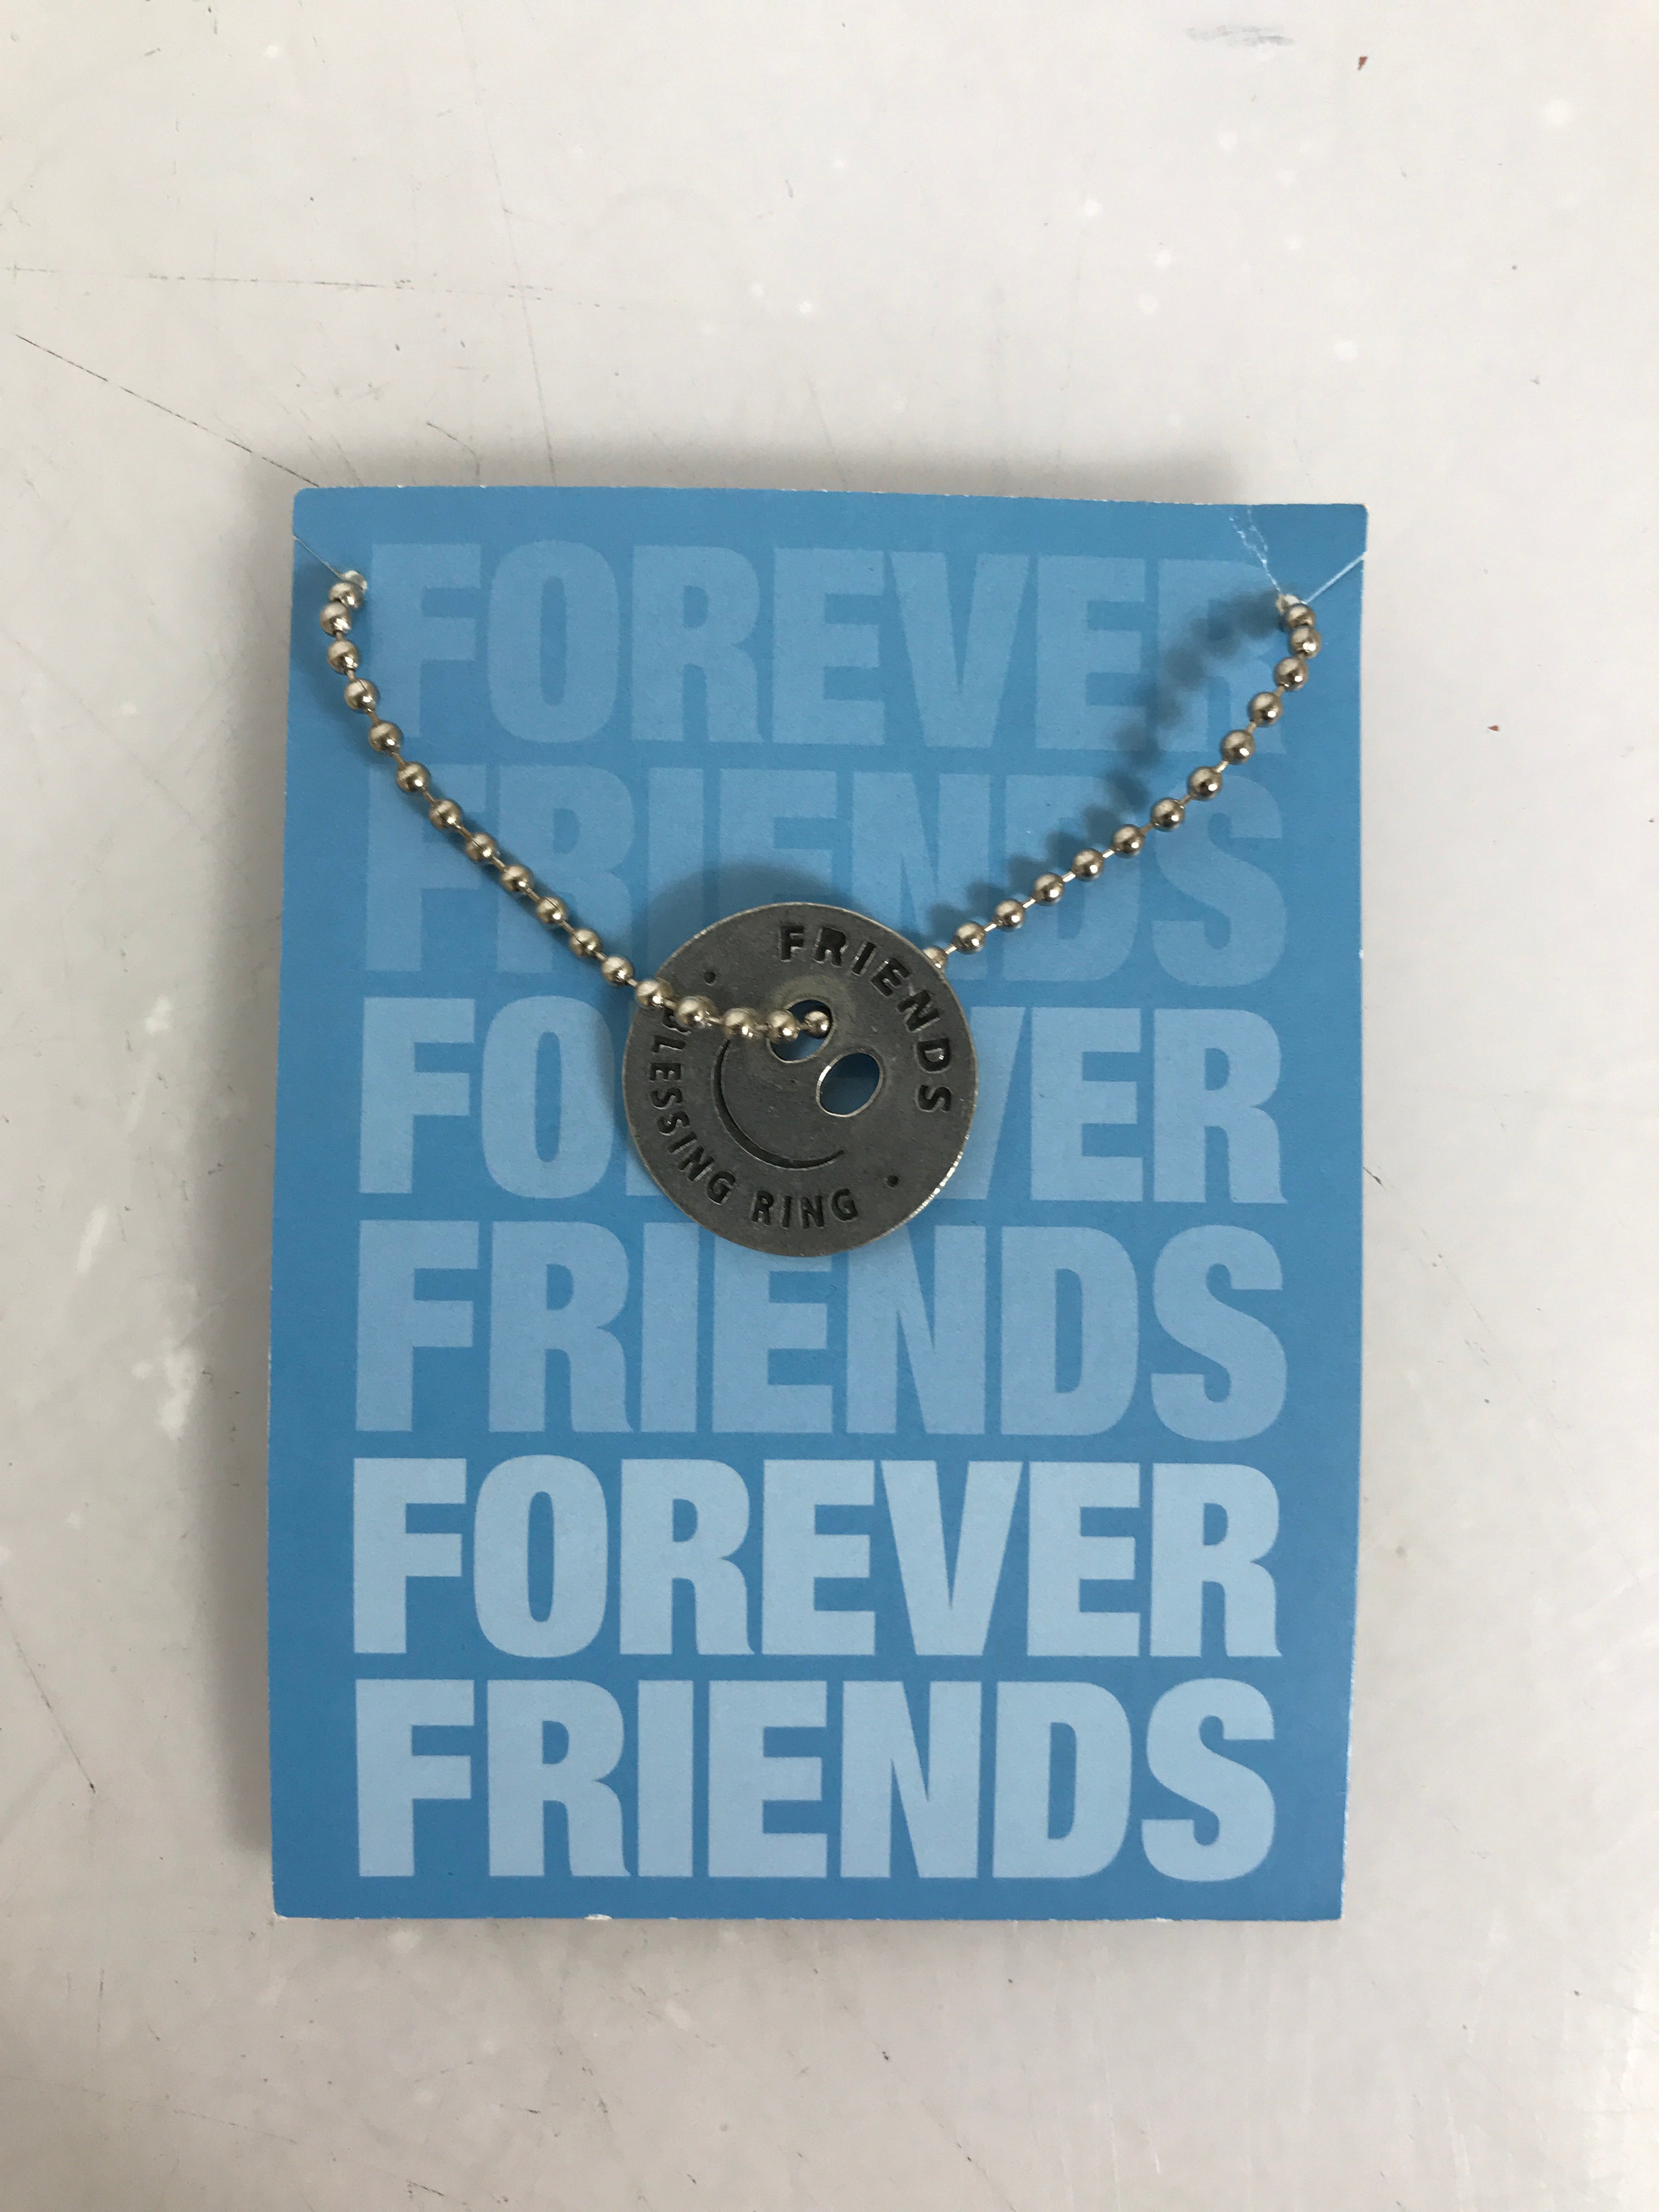 WHD BlessingRings "Friends" Necklace